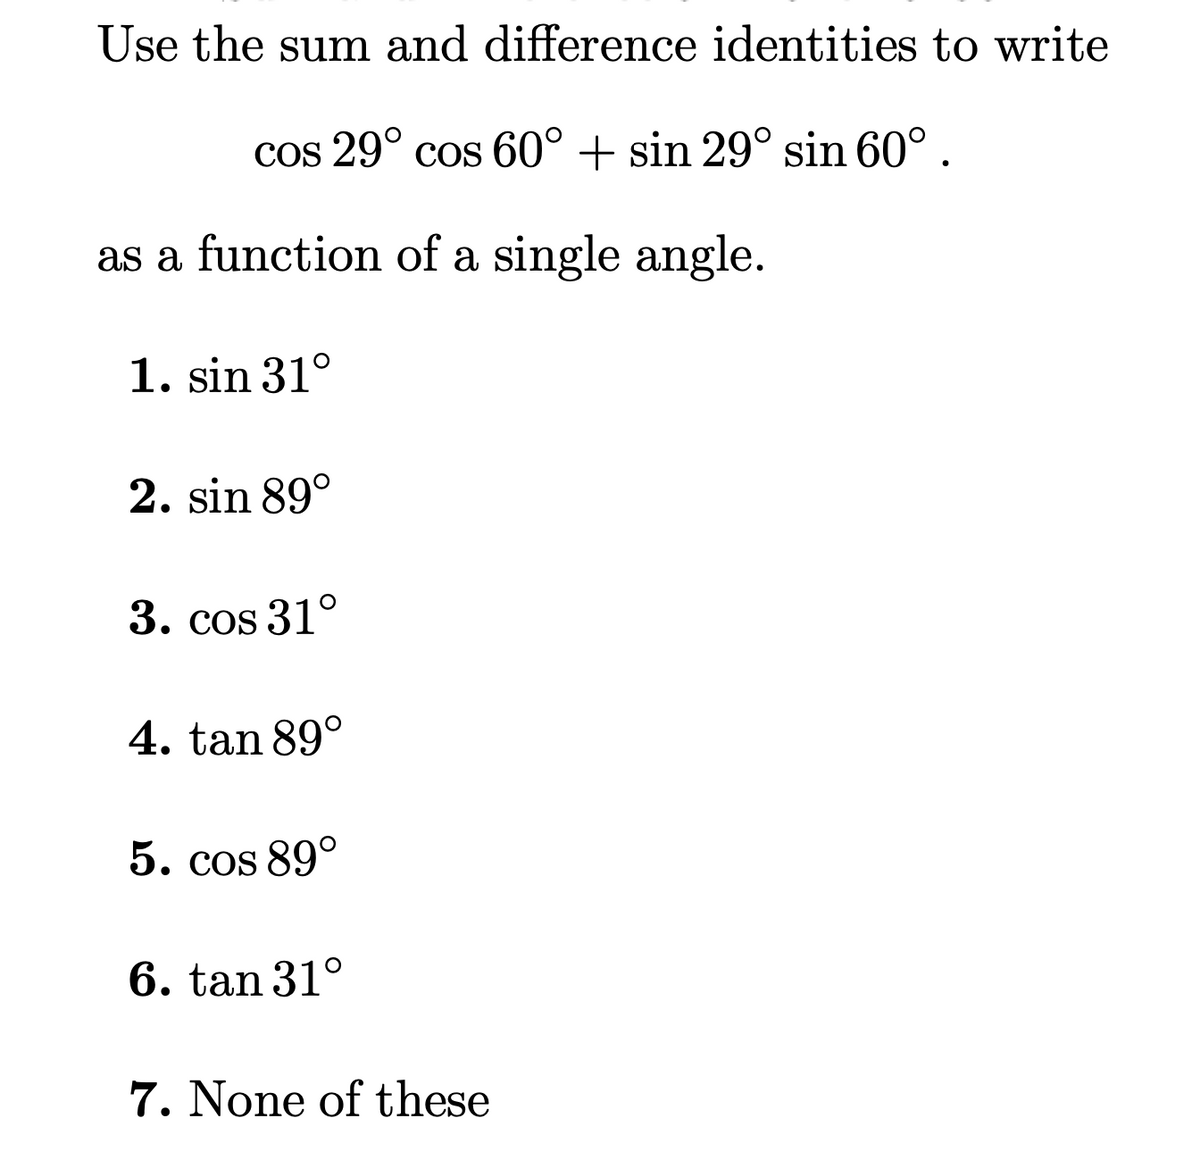 Use the sum and difference identities to write
cos 29° cos 60° + sin 29° sin 60°.
as a function of a single angle.
1. sin 31°
2. sin 89°
3. cos 31°
4. tan 89°
5. cos 89°
6. tan 31°
7. None of these
